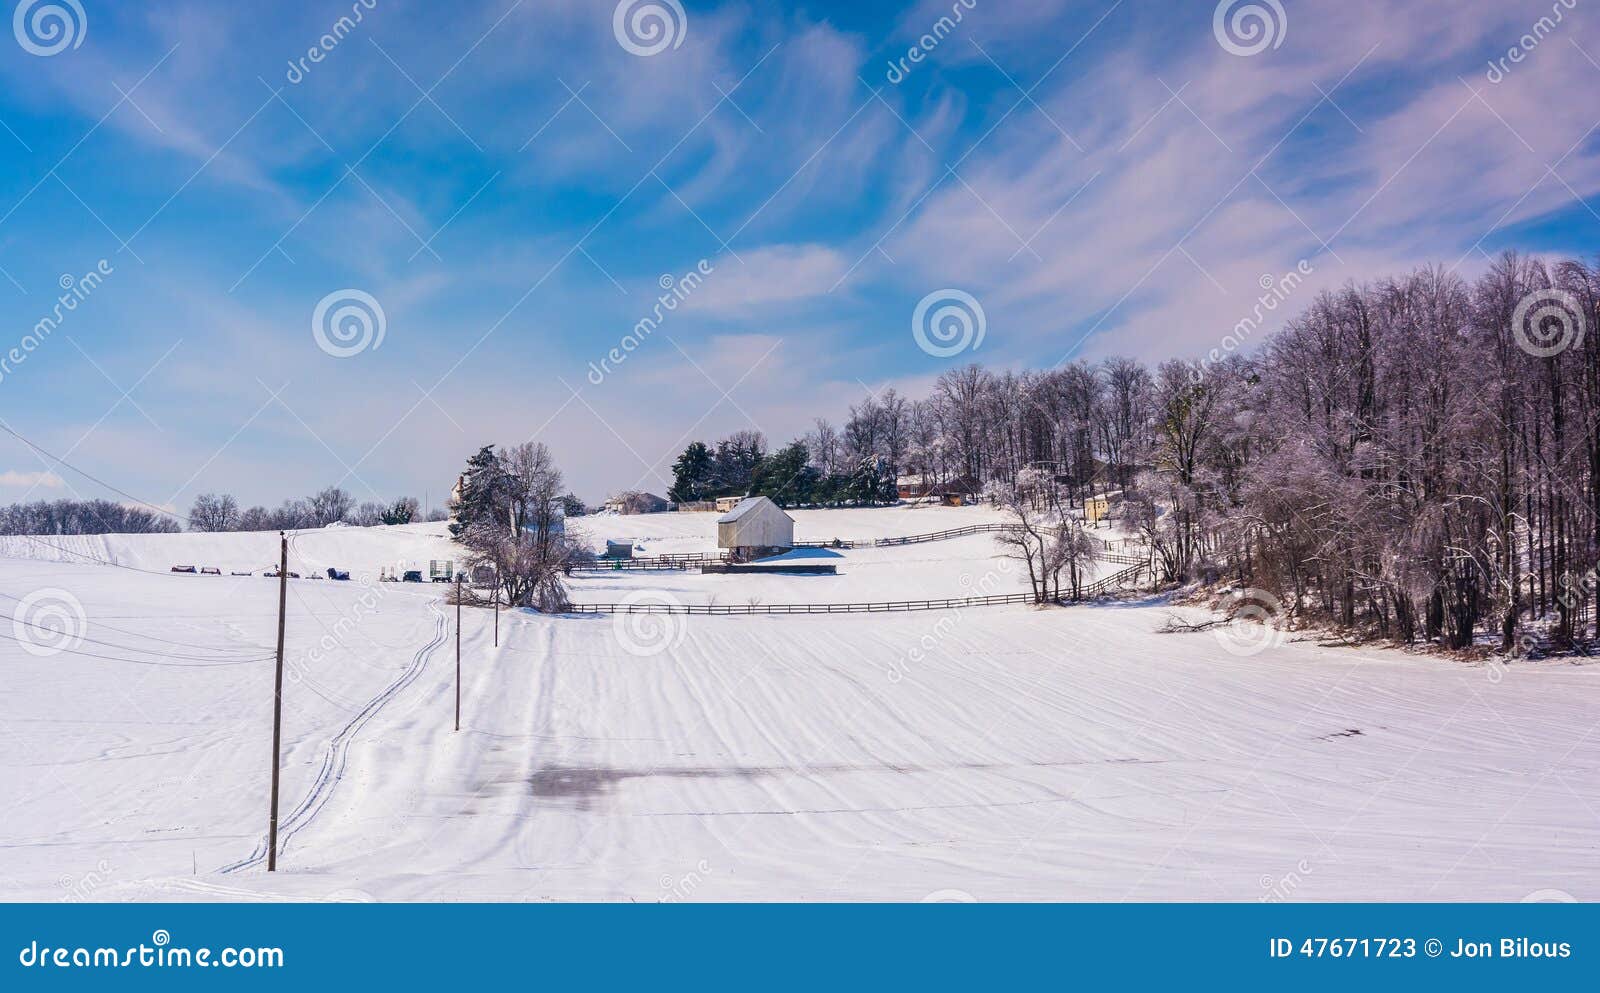 winter view of snow covered farm fields in rural carroll county, maryland.